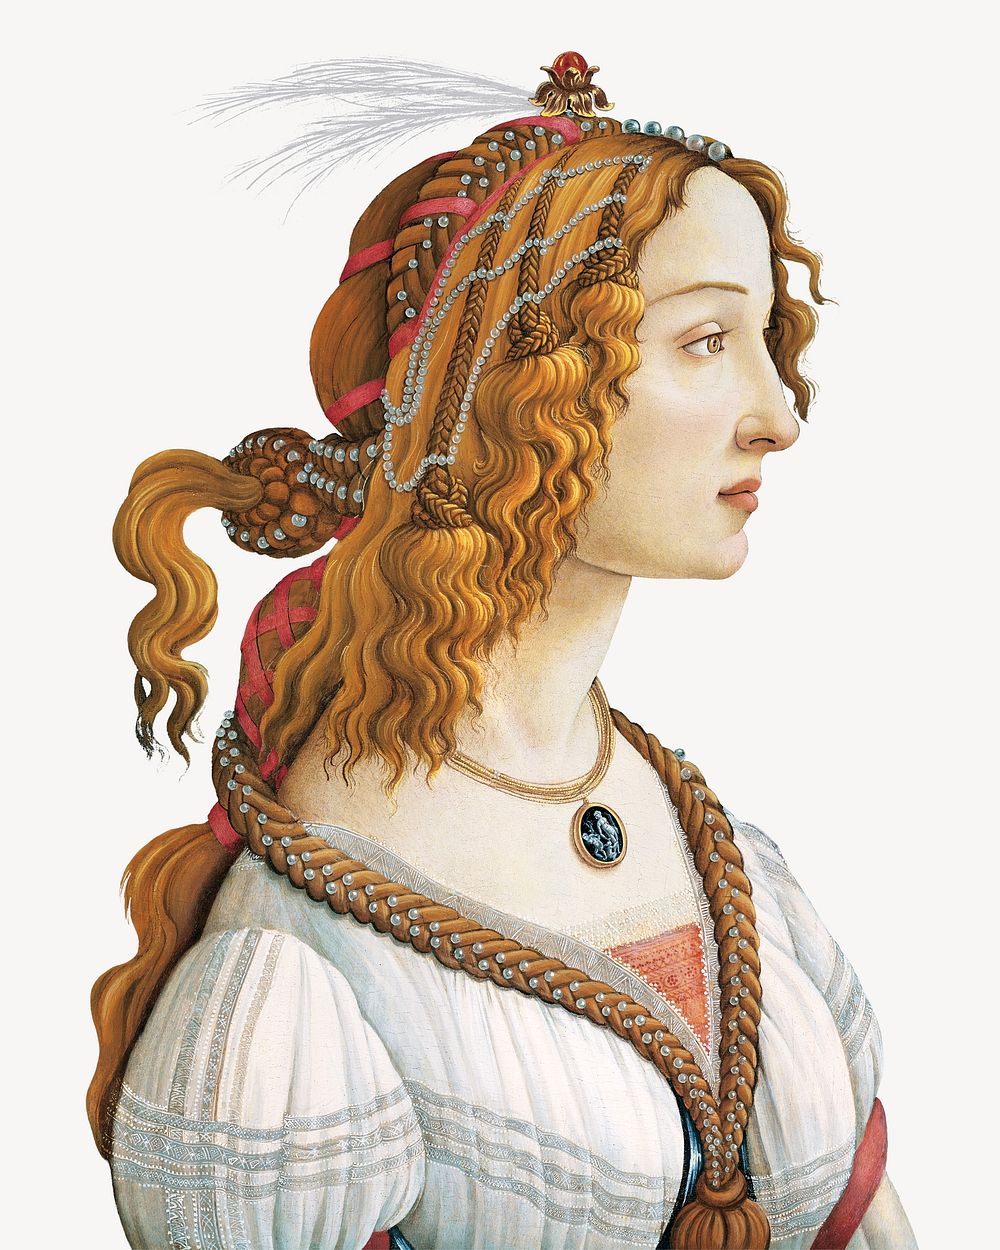 Aesthetic Sandro Botticelli's woman portrait illustration.  Remastered by rawpixel